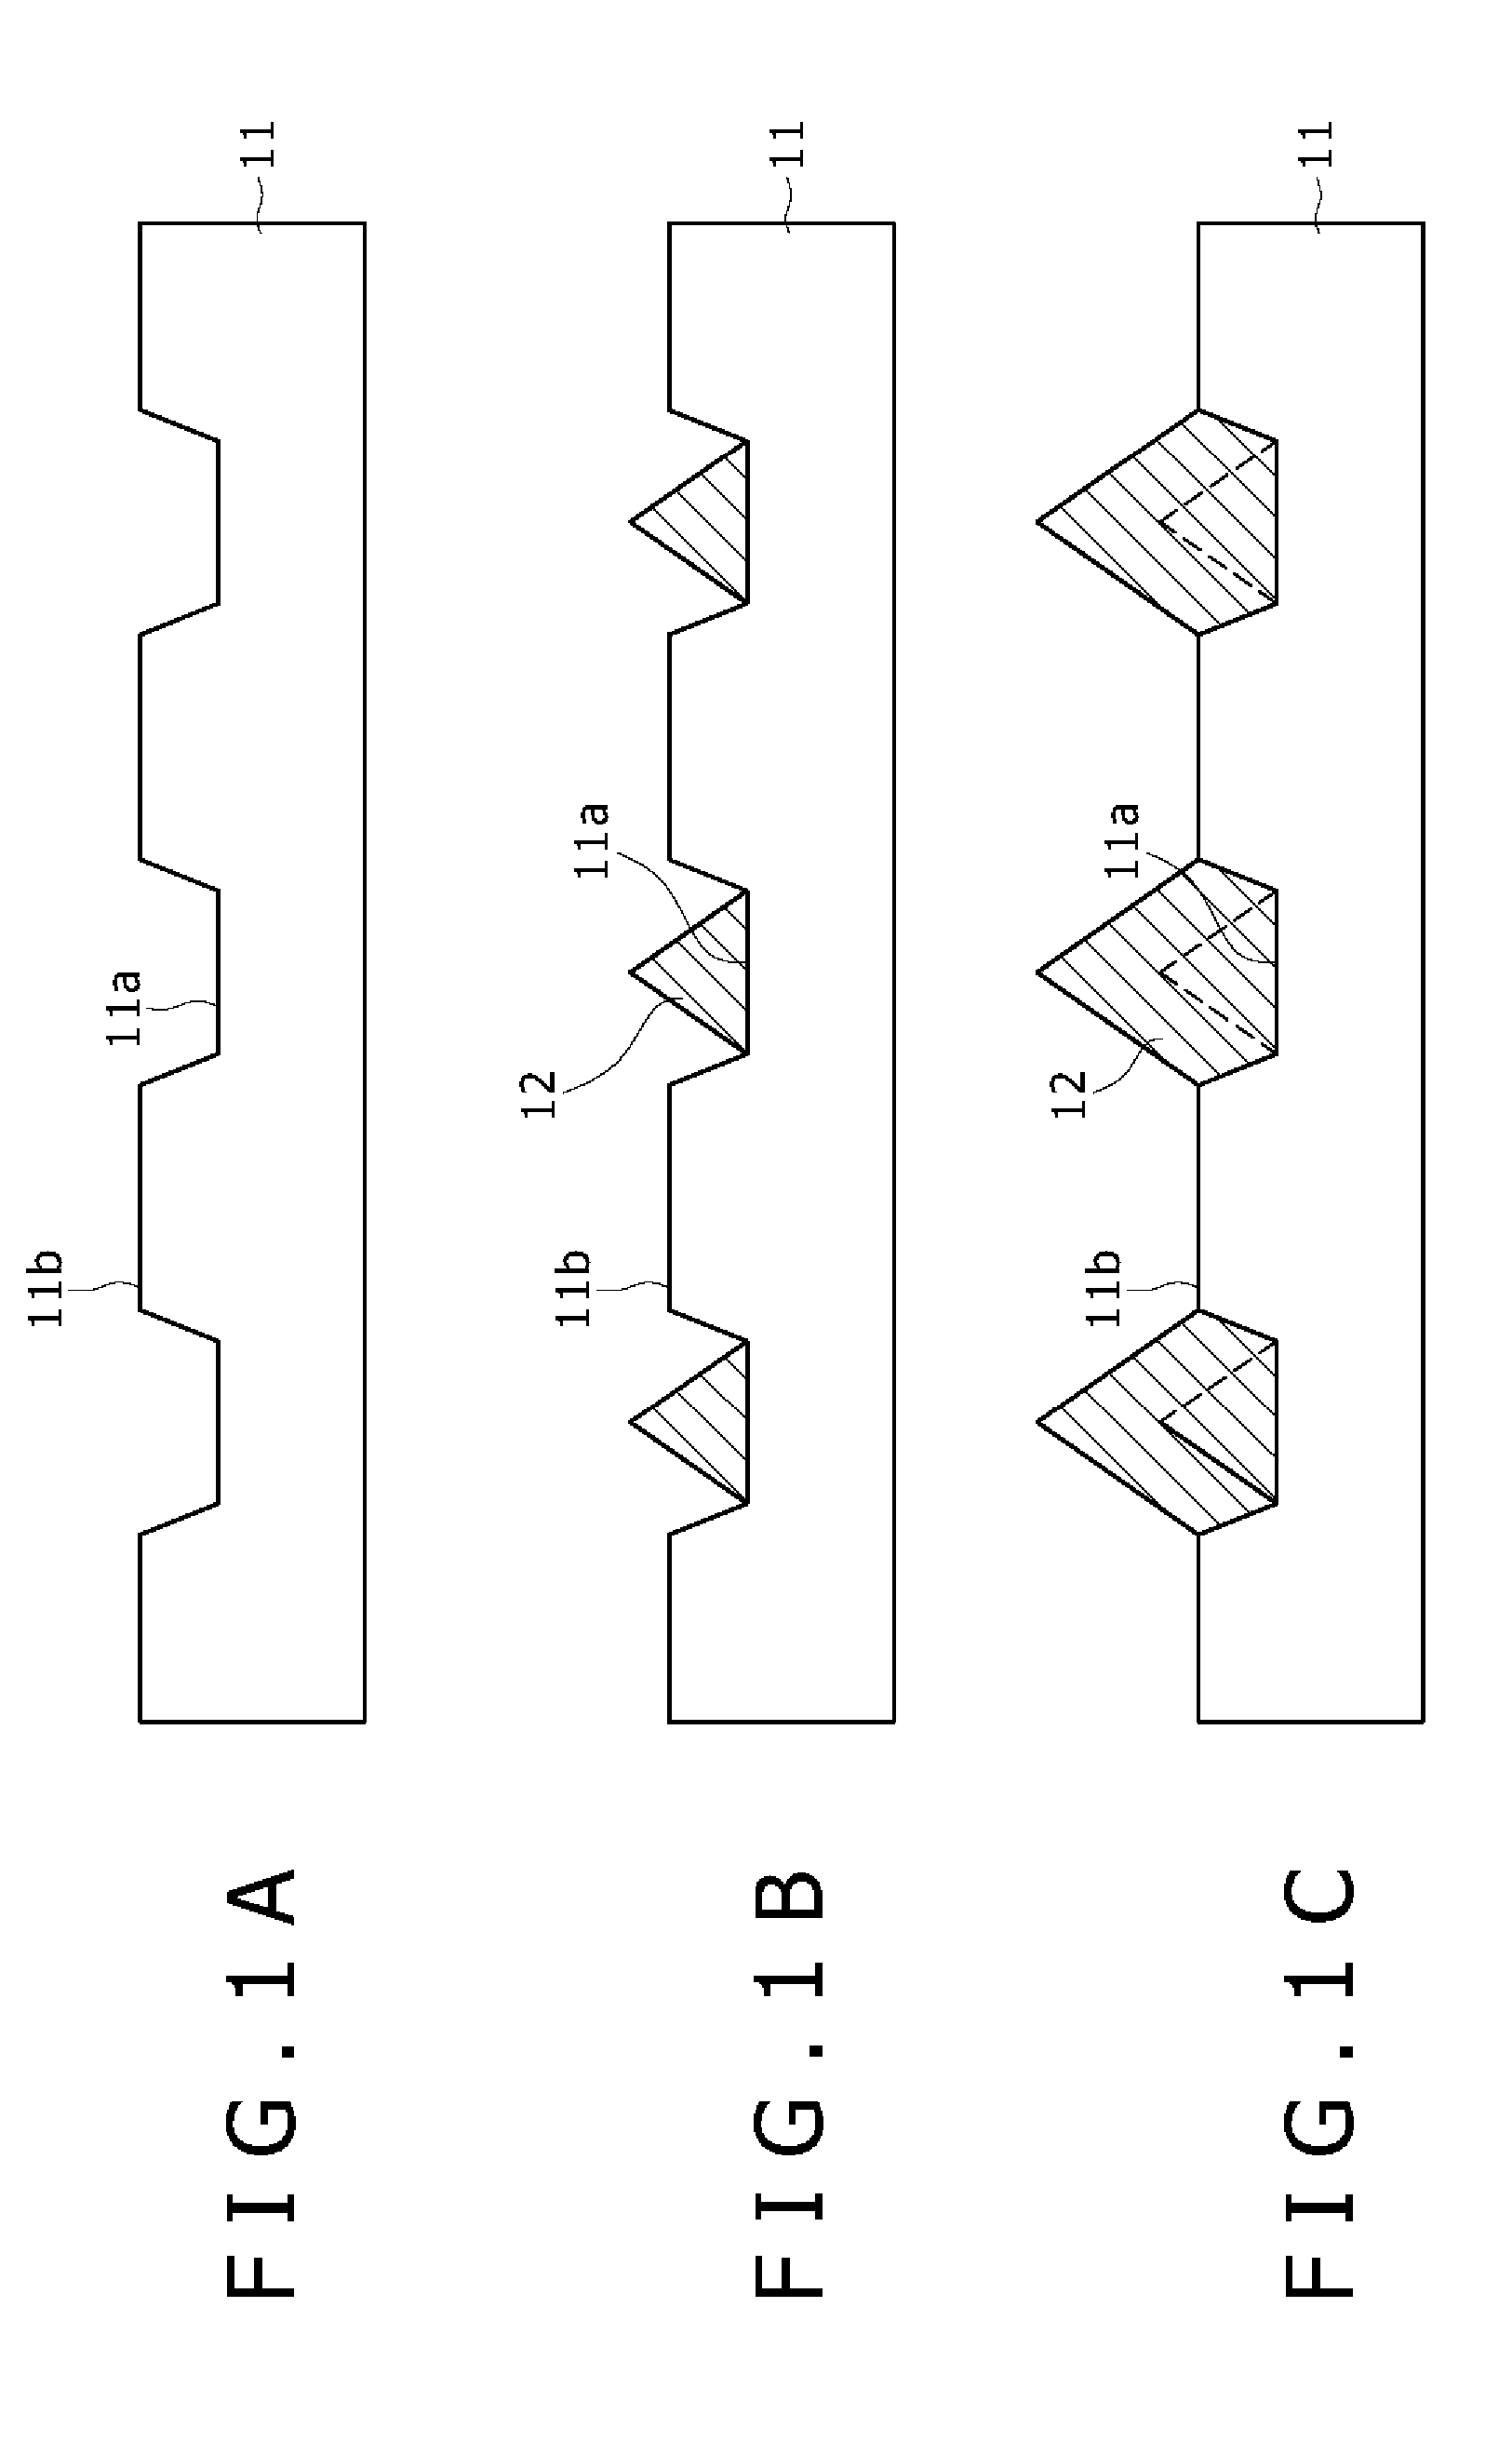 Light-emitting diode, method for making light-emitting diode, integrated light-emitting diode and method for making integrated light-emitting diode, method for growing a nitride-based iii-v group compound semiconductor, light source cell unit, light-emitting diode backlight, and light-emitting diode display and electronic device